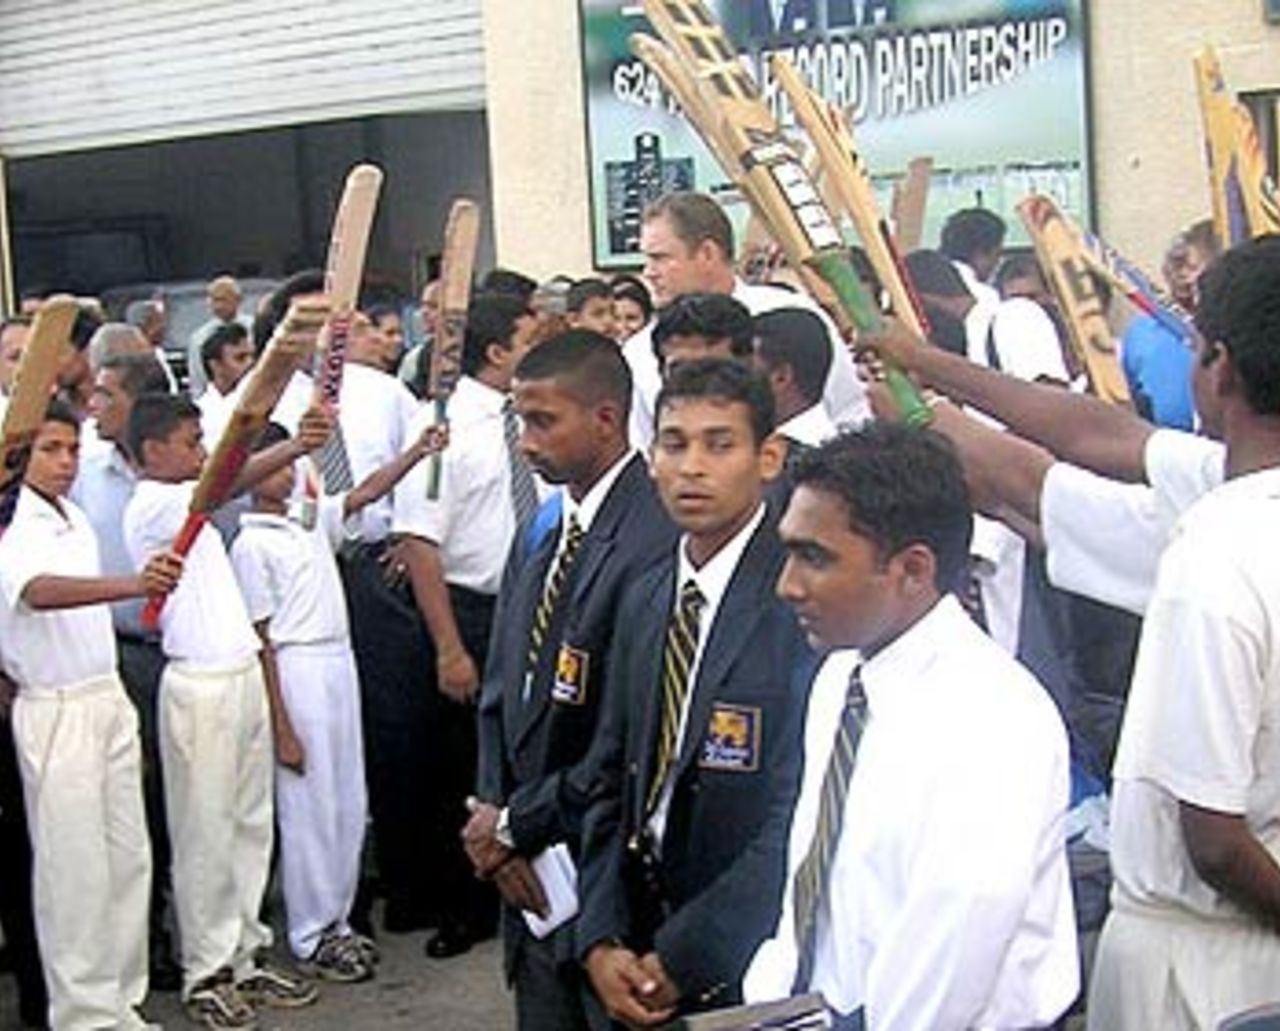 The Sri Lankans receive a grand send off before embarking on their World Cup campaign, Colombo, February 28, 2007